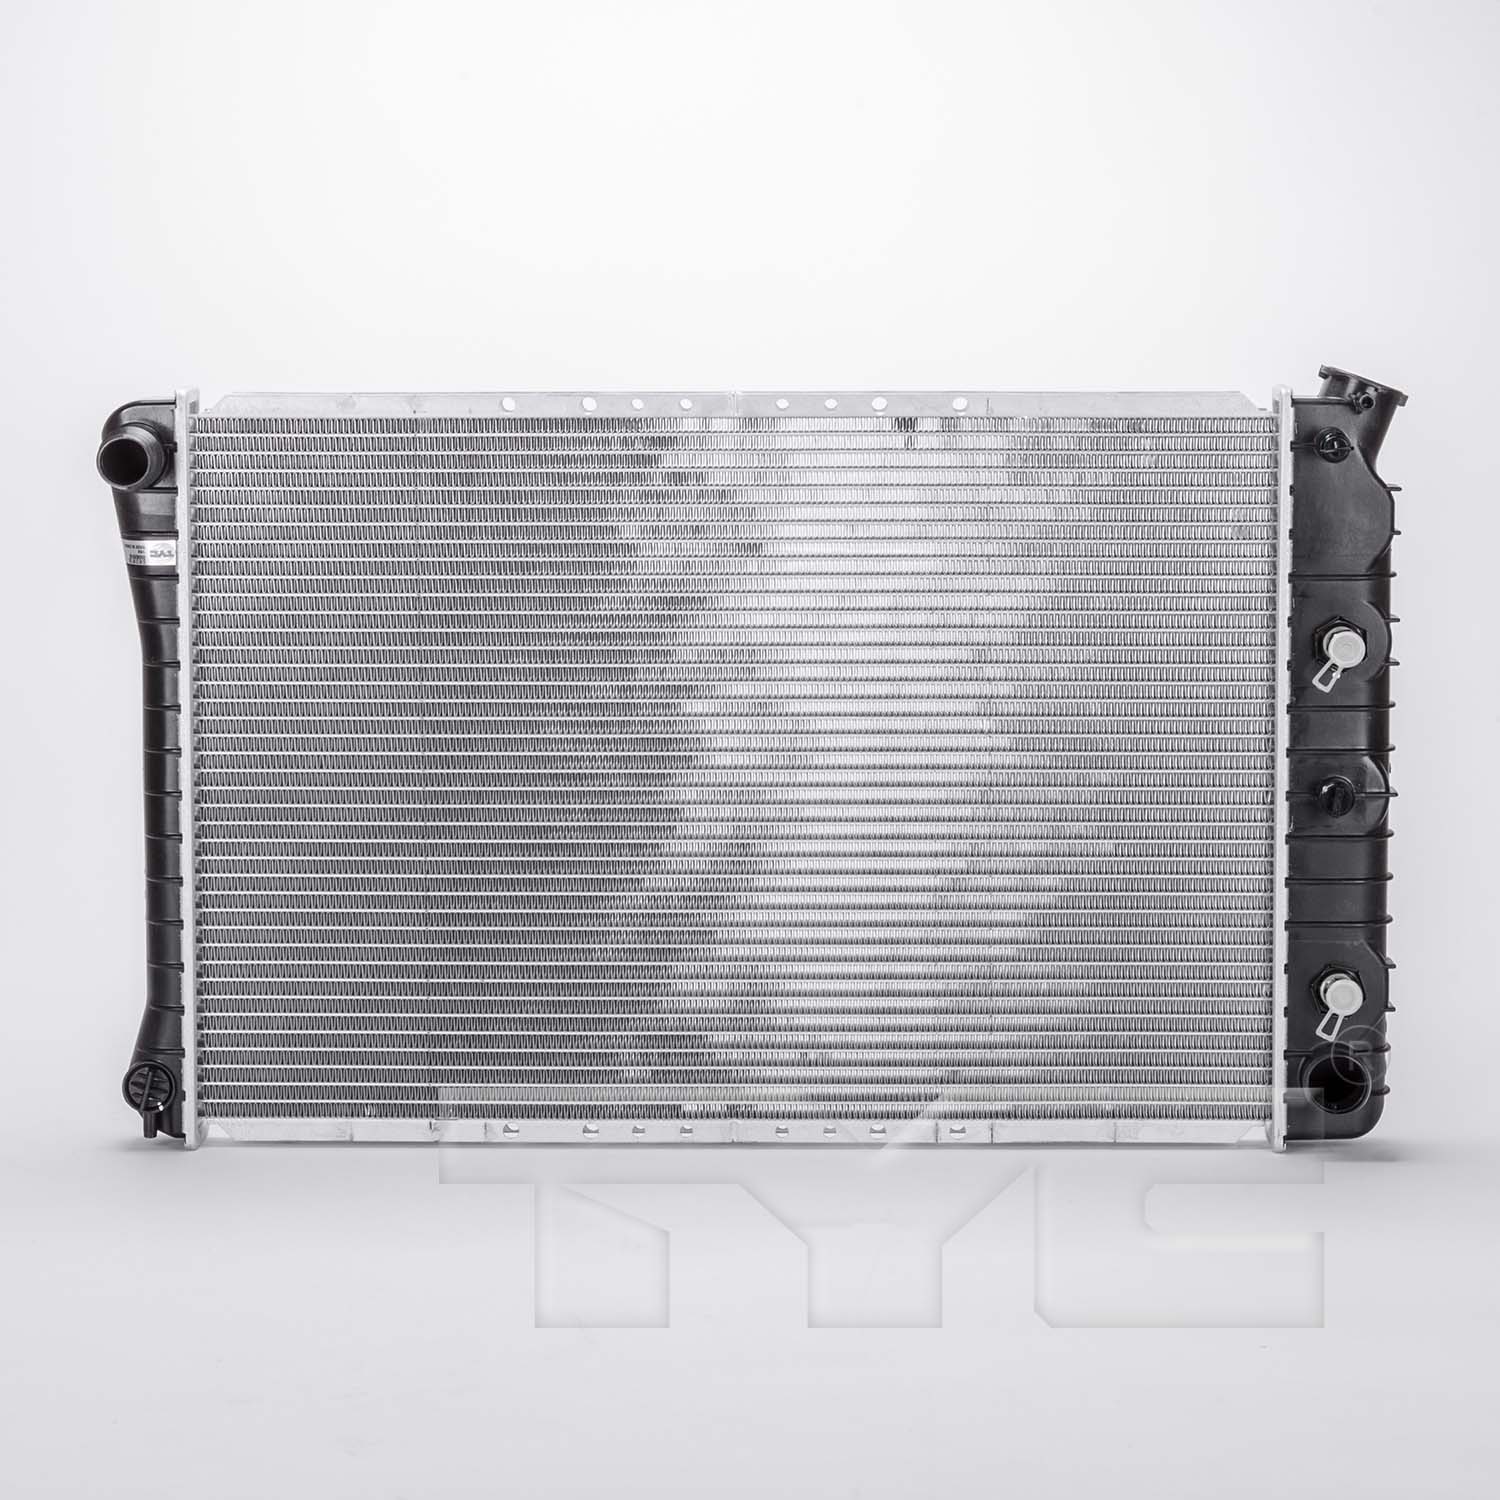 Aftermarket RADIATORS for CHEVROLET - MONTE CARLO, MONTE CARLO,78-81,Radiator assembly